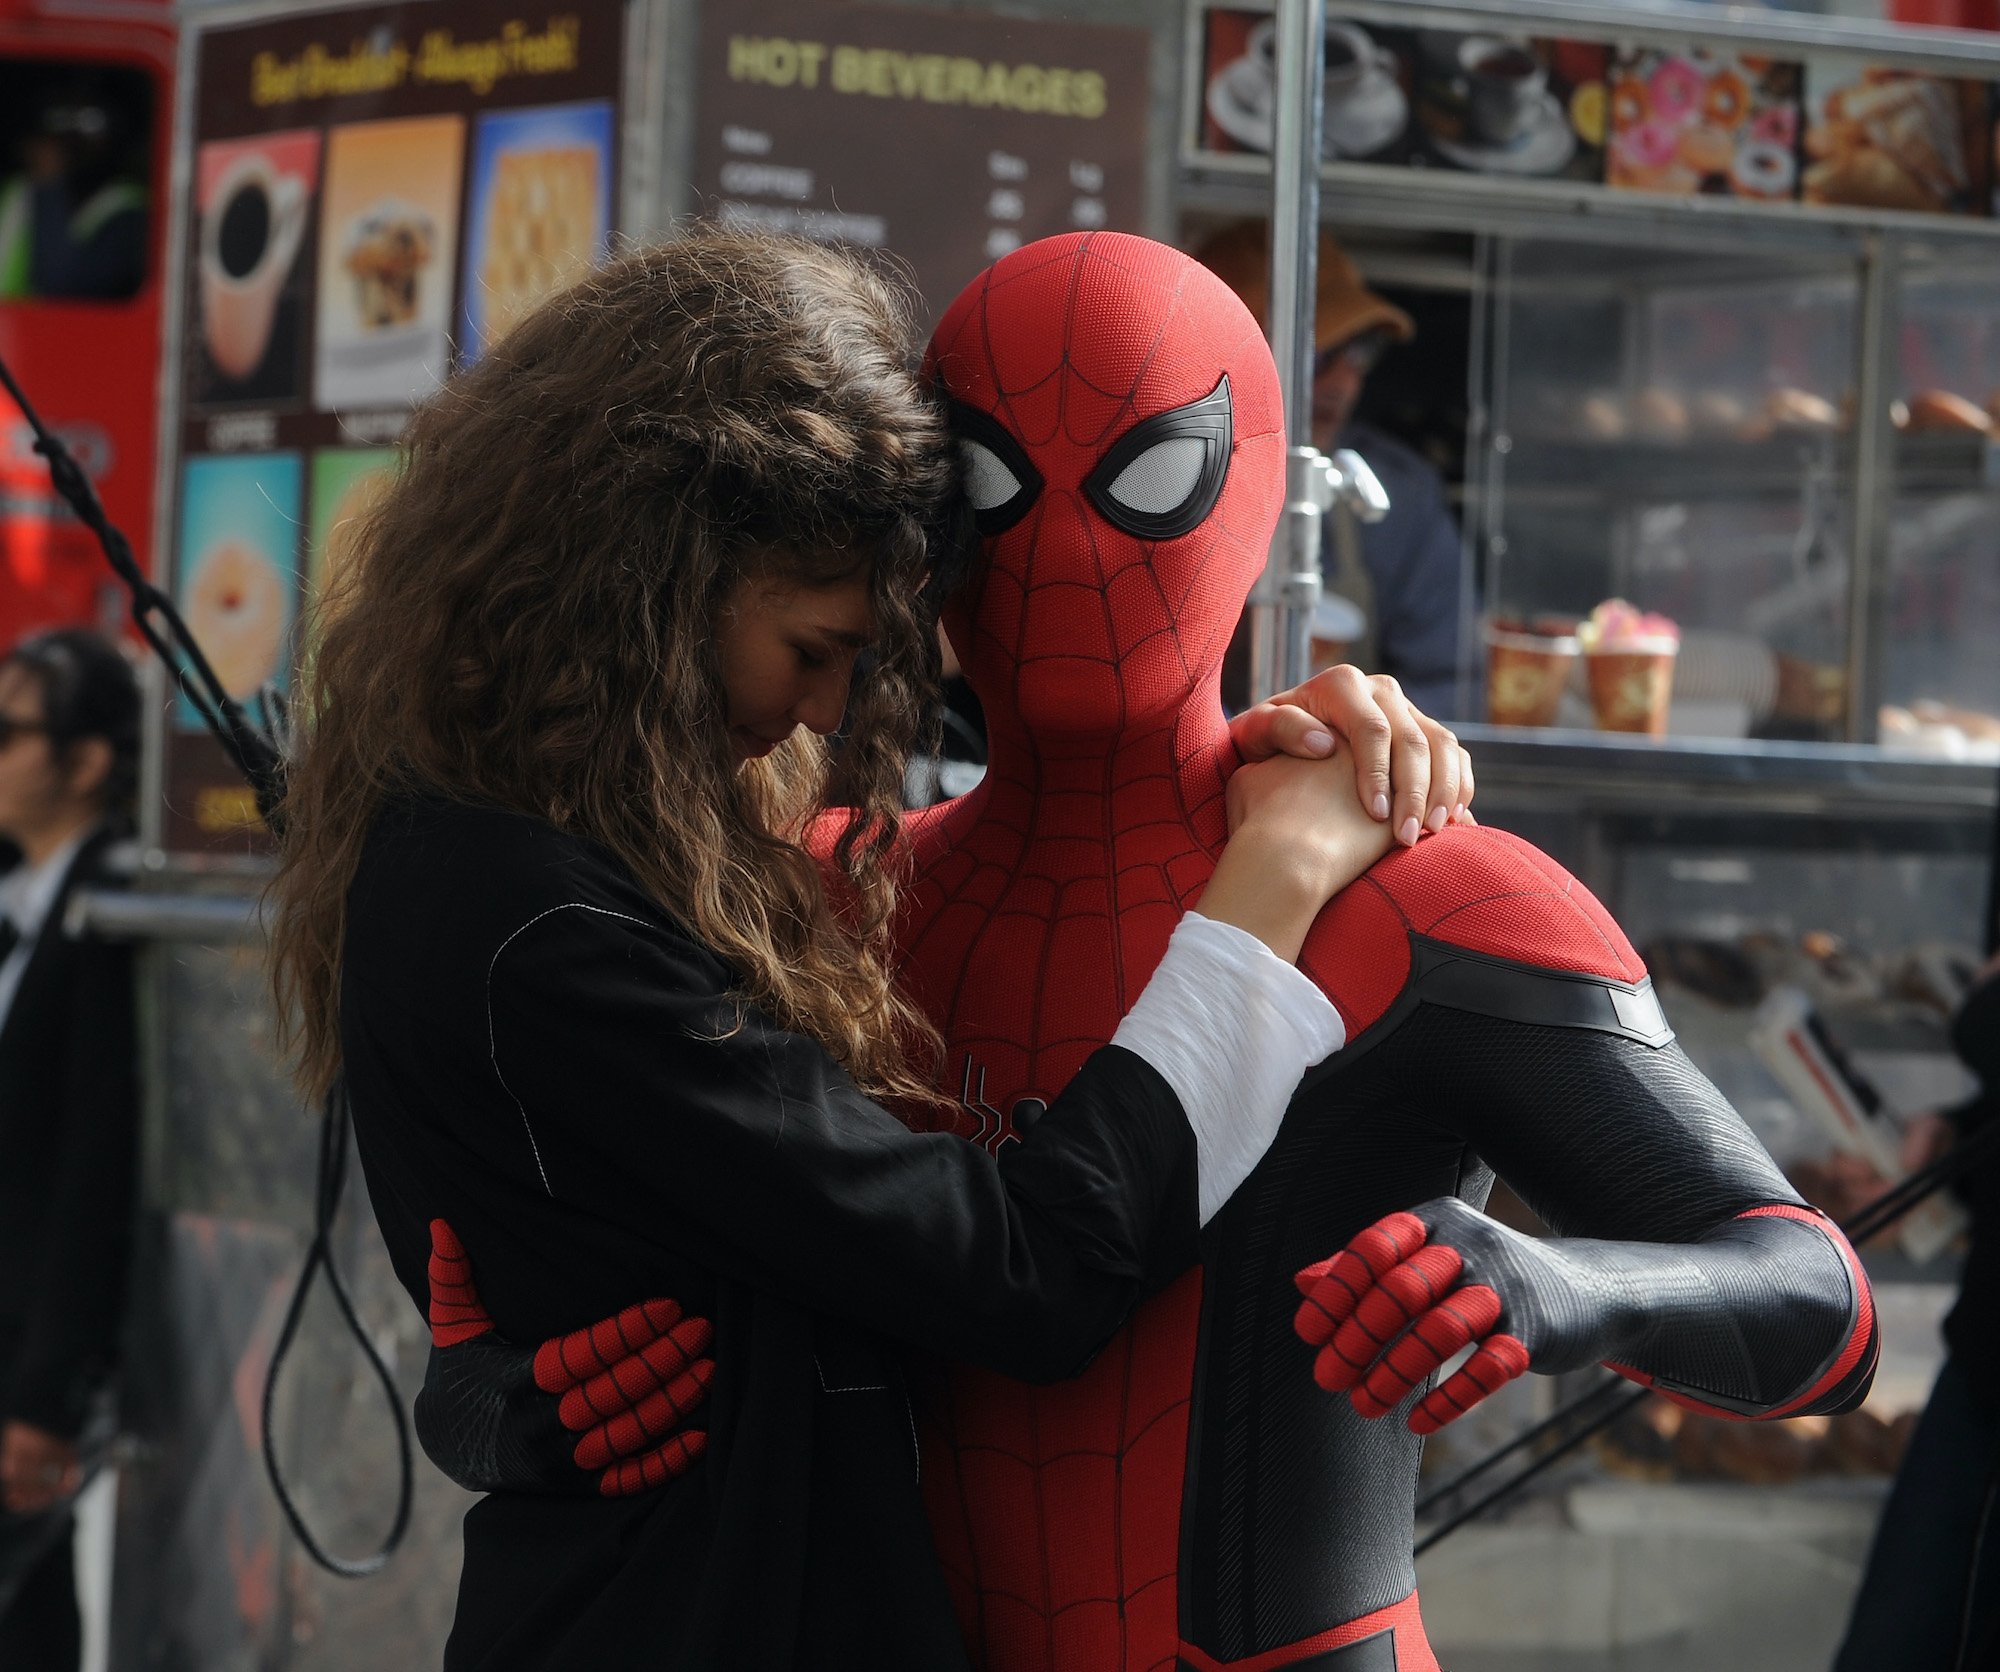 Tom Holland and Zendaya on the set of 'Spiderman: Far From Home' on Oct. 12, 2018 in New York City